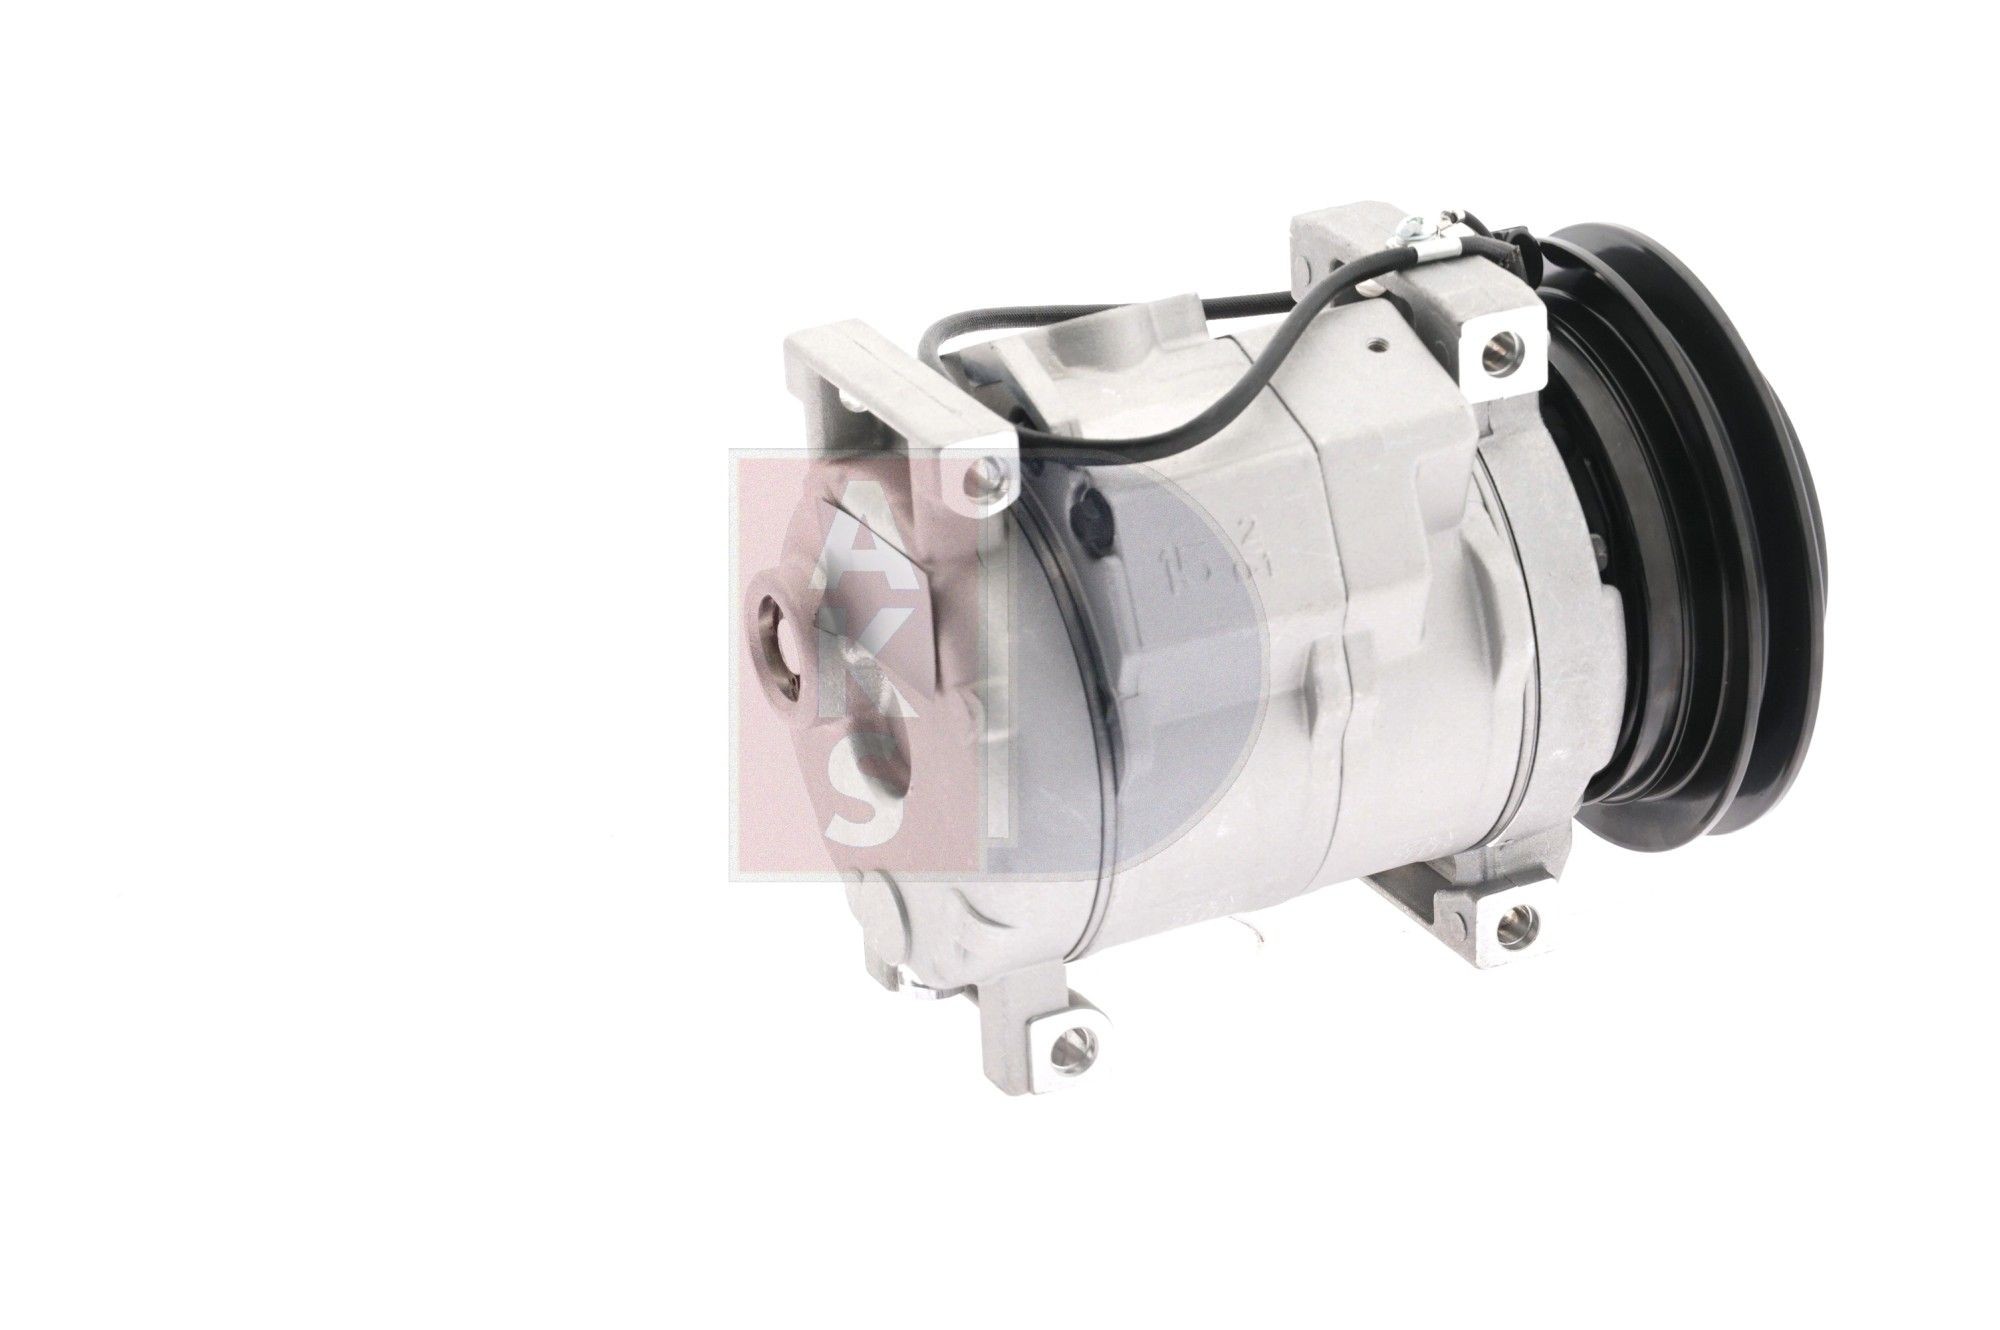 Air conditioning compressor 851762N from AKS DASIS